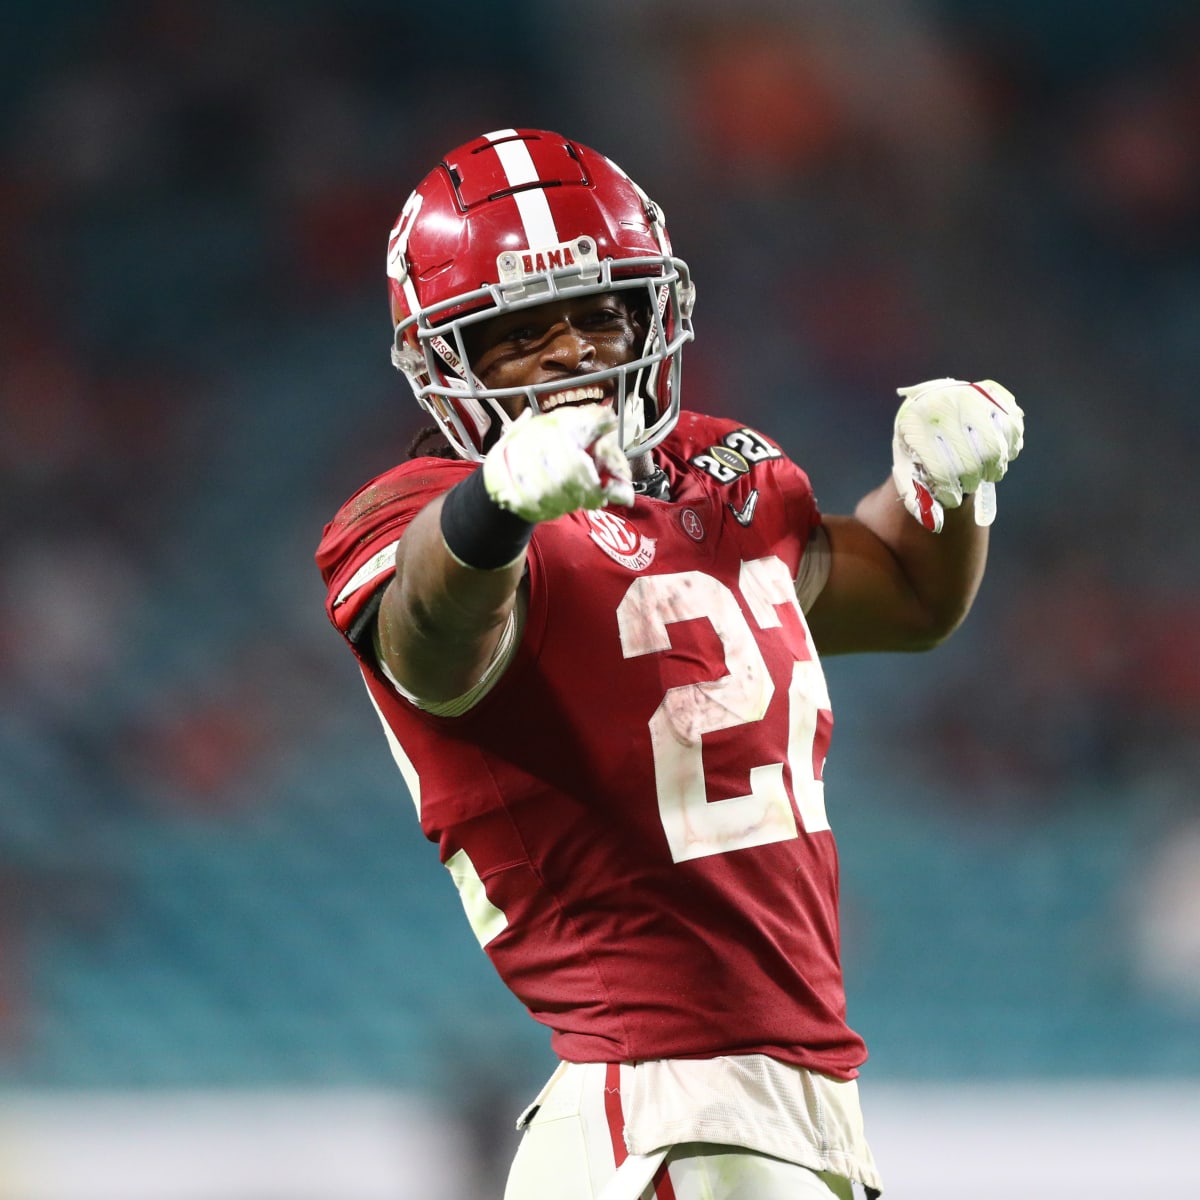 Najee Harris - Running Back Alabama Crimson Tide 2021 NFL Draft Scouting  Report - Visit NFL Draft on Sports Illustrated, the latest news coverage,  with rankings for NFL Draft prospects, College Football,